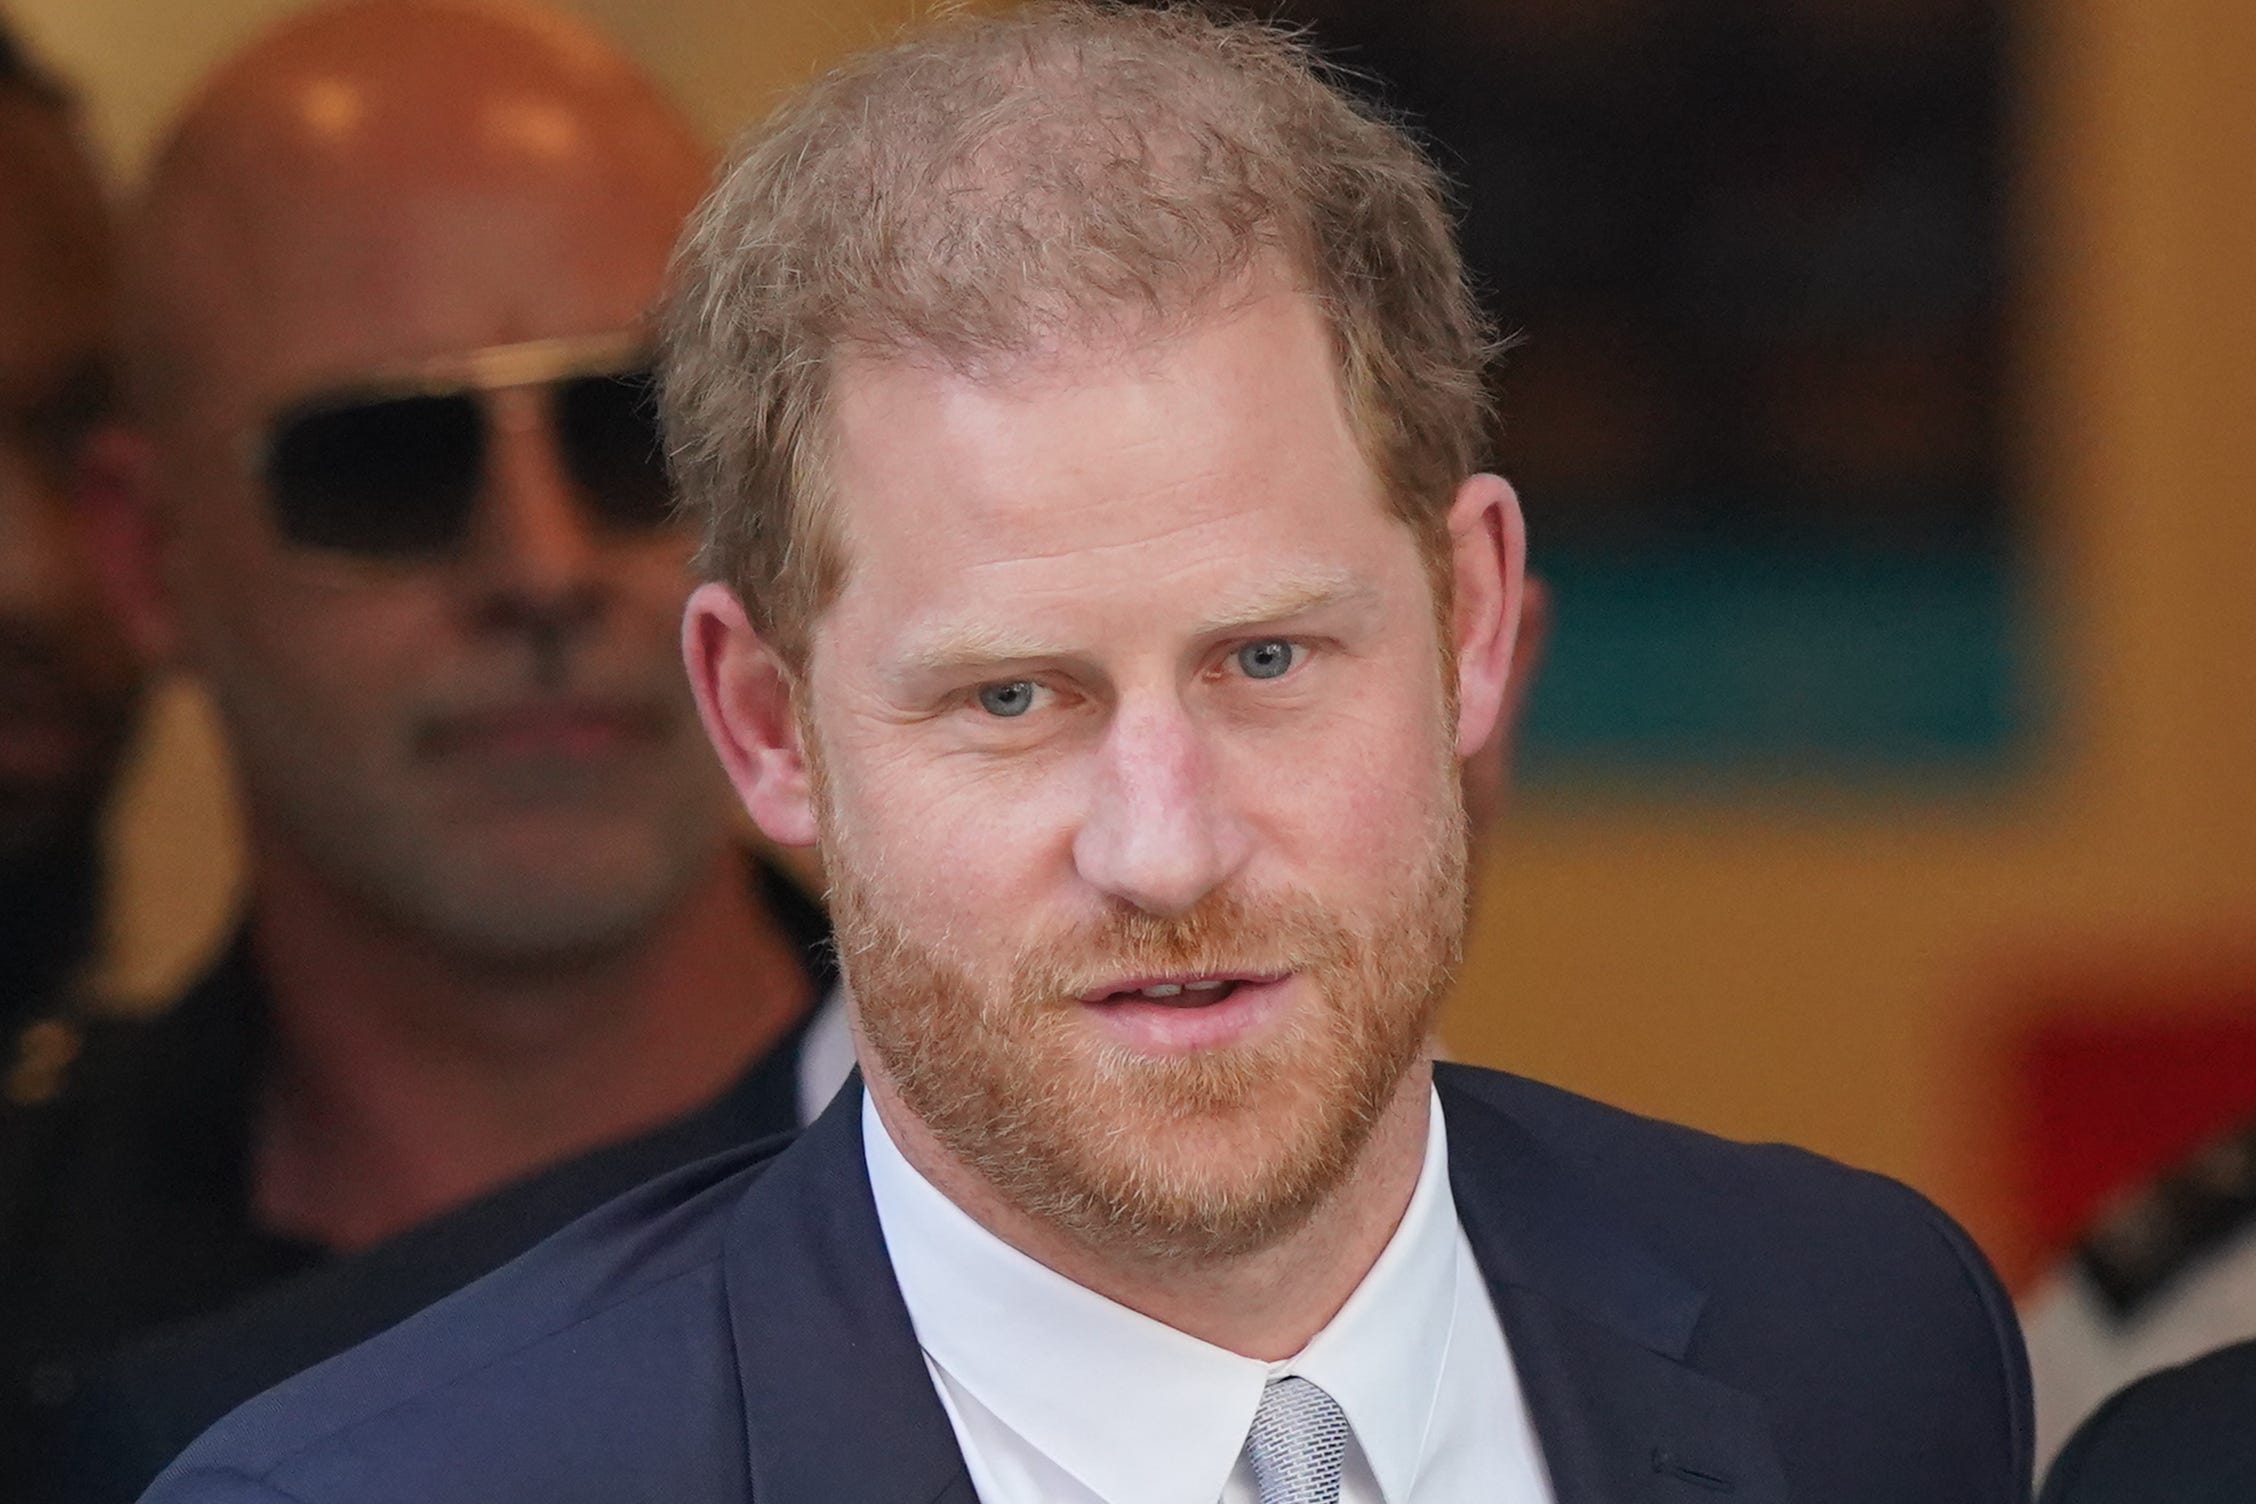 The Duke of Sussex gave evidence during the High Court trial of his claim against Mirror Group Newspapers